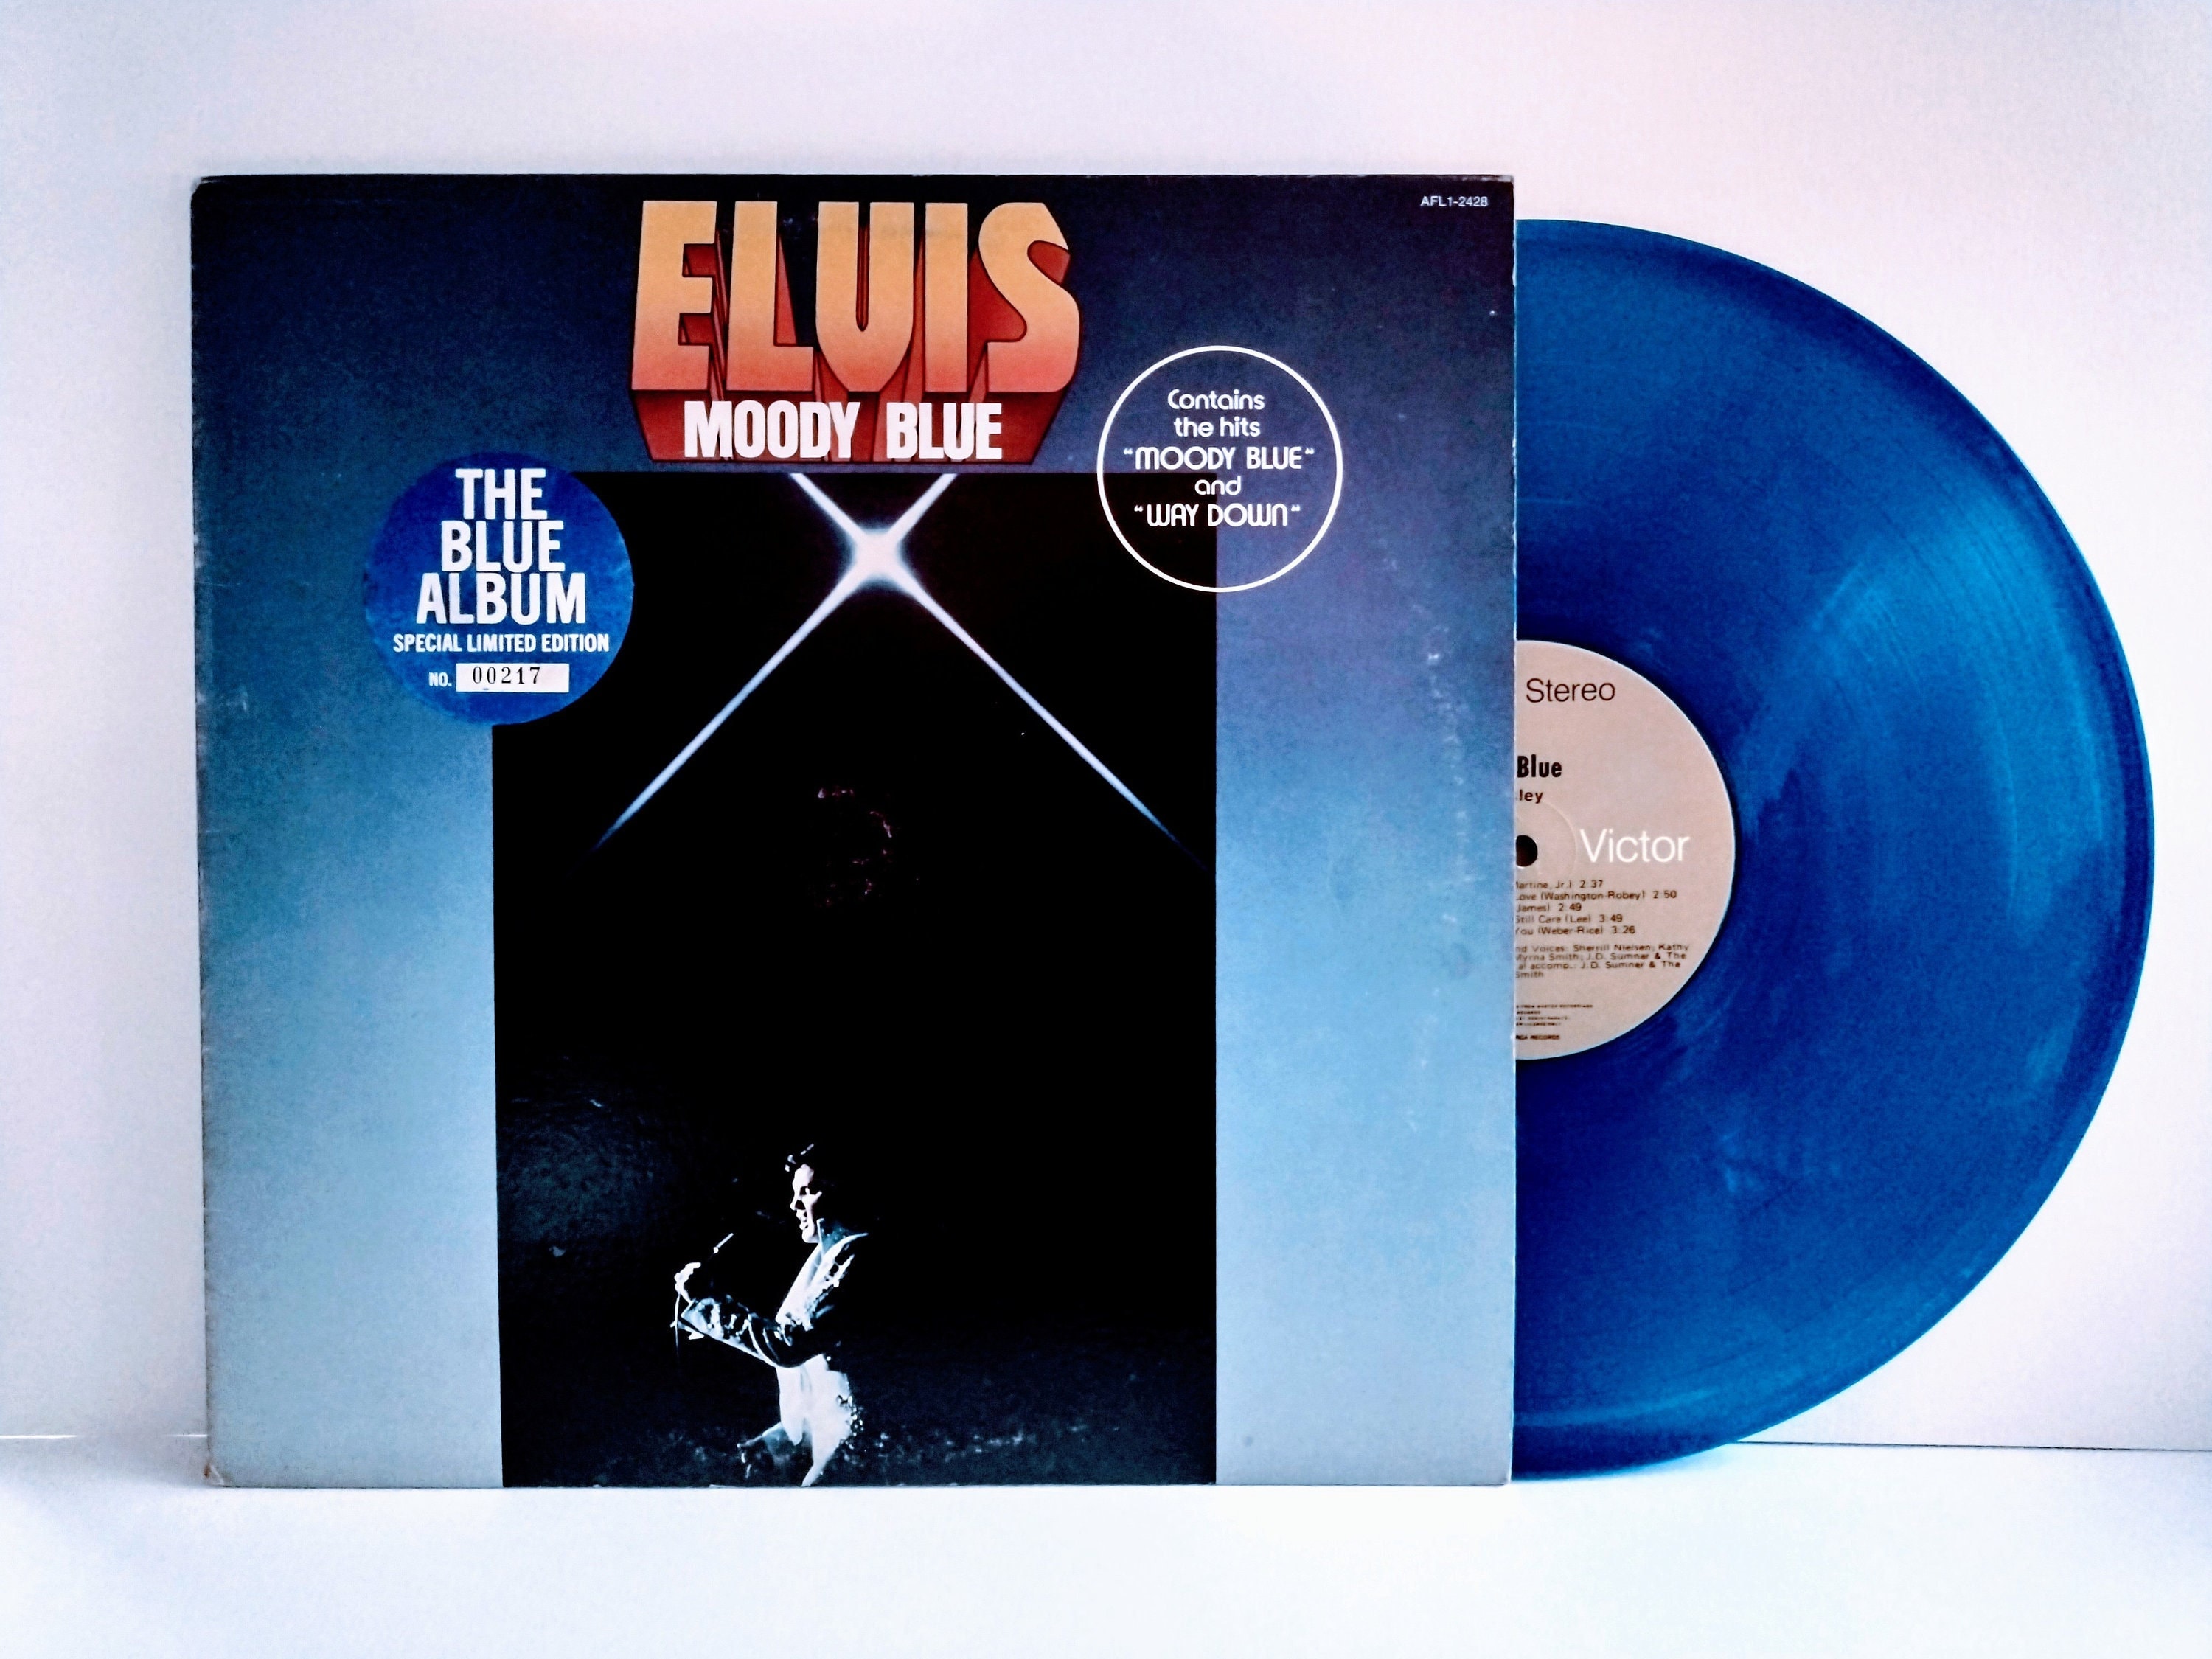 ELVIS PRESLEY Moody the Blue Album Special Limited - Etsy